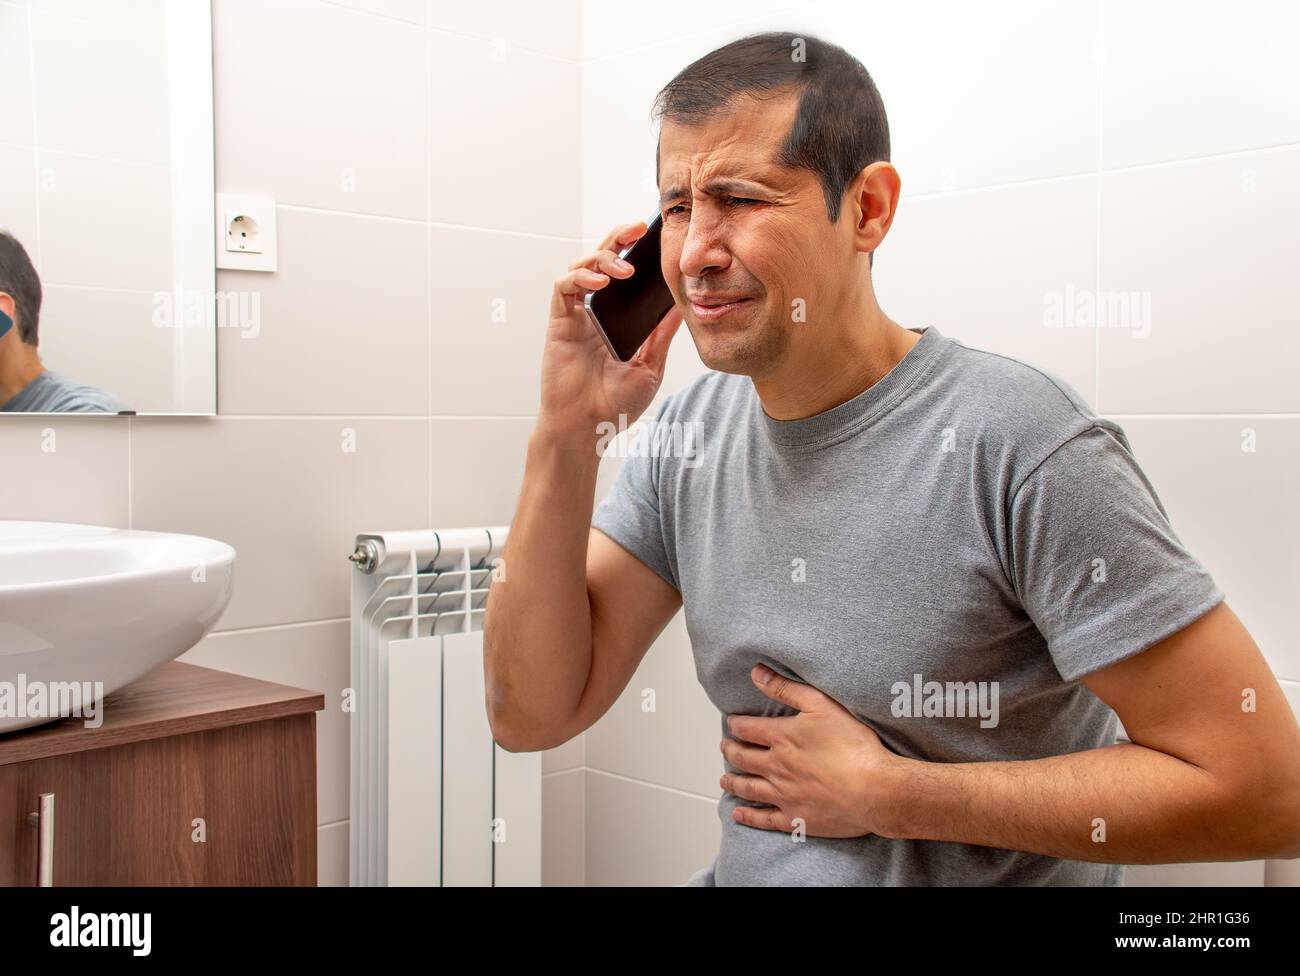 Cropped shot of an man sitting on the toilet in a bathroom suffering from stomach cramps and calling medical assistance on phone Stock Photo